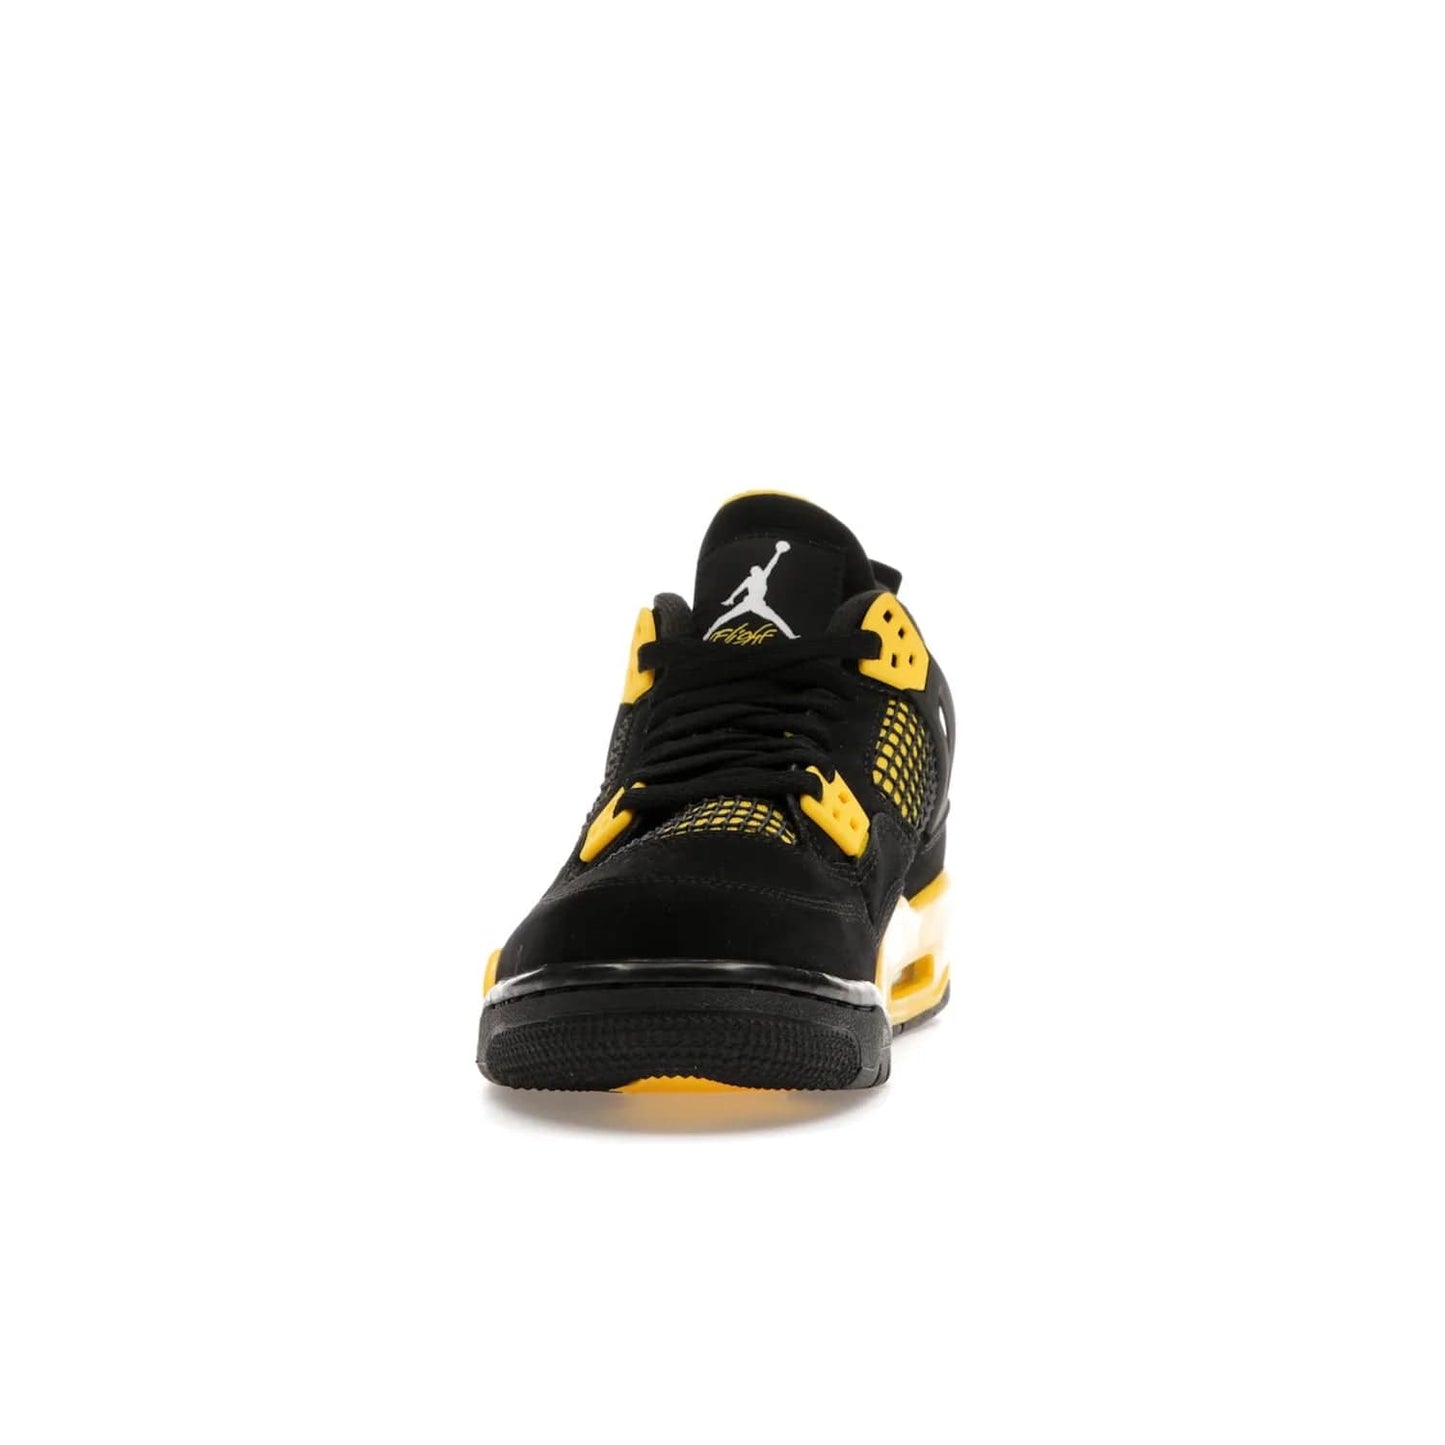 Jordan 4 Retro Thunder (2023) (GS) - Image 11 - Only at www.BallersClubKickz.com - Introducing the iconic Jordan 4 Retro Thunder from the 2023 collection! Sleek black and Tour Yellow detailing. Signature Jordan tongue tab. Mesmerizing design for sneaker collectors. Get yours now!